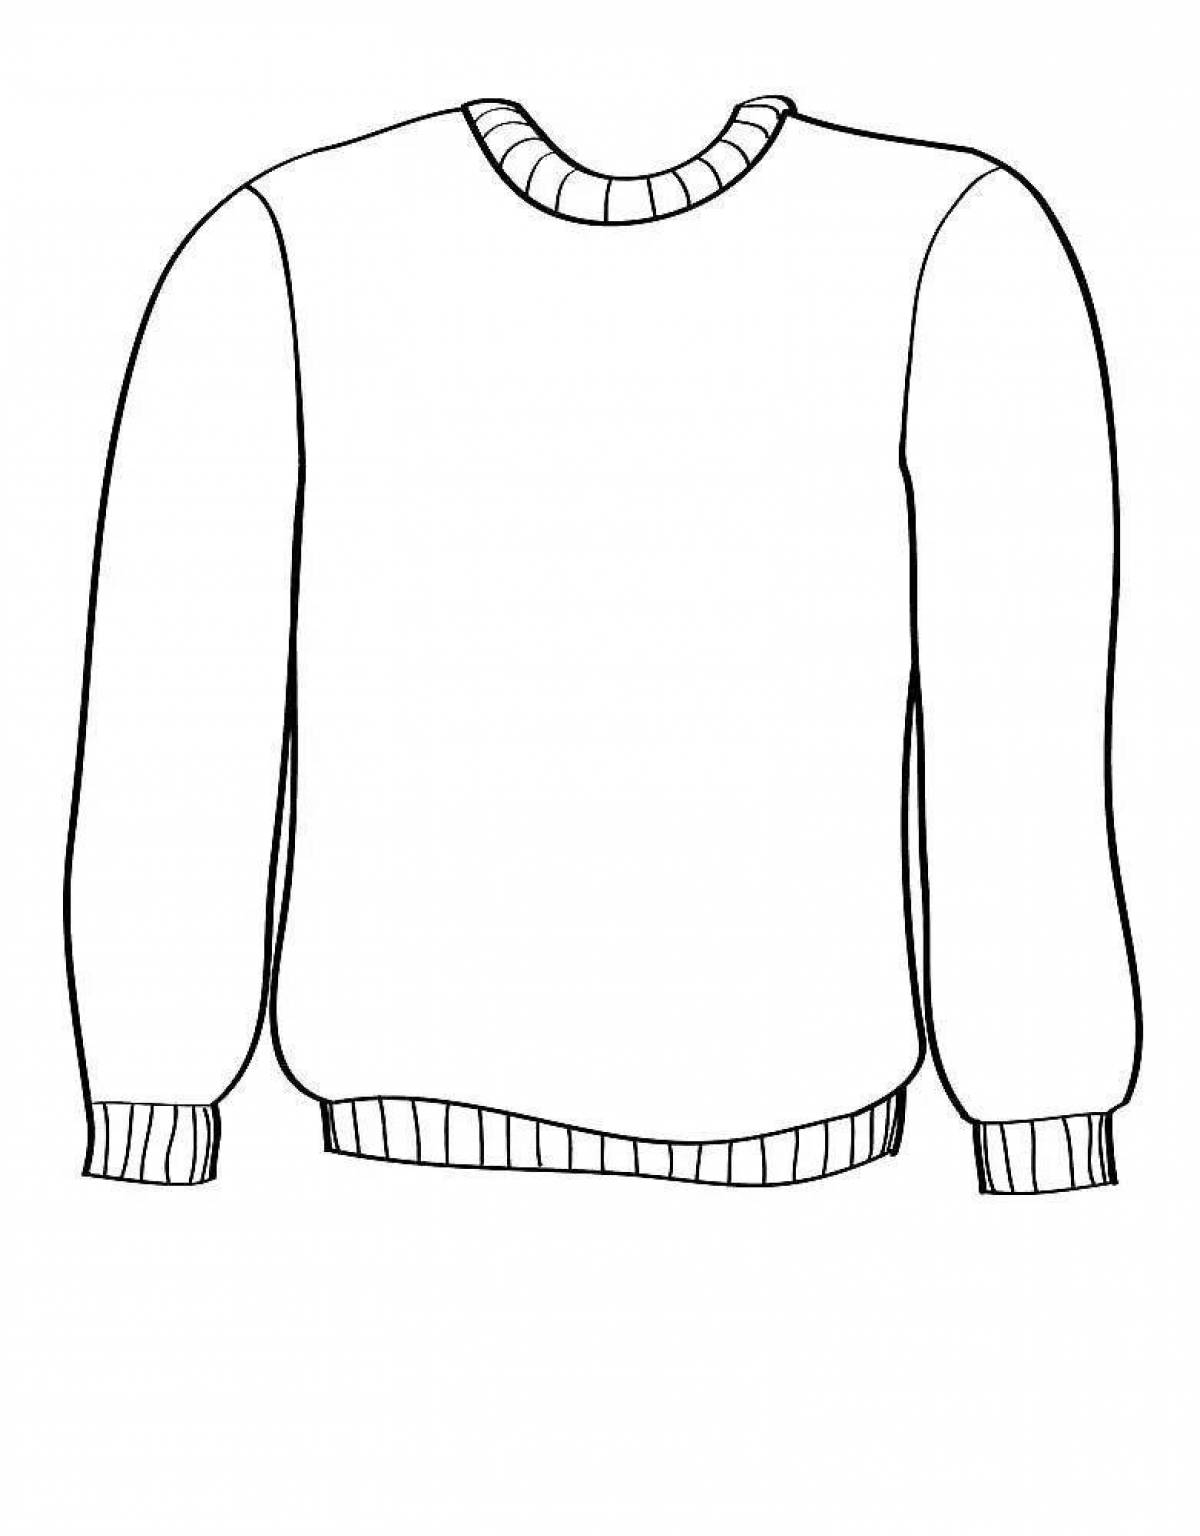 Cute sweater coloring page for 4-5 year olds